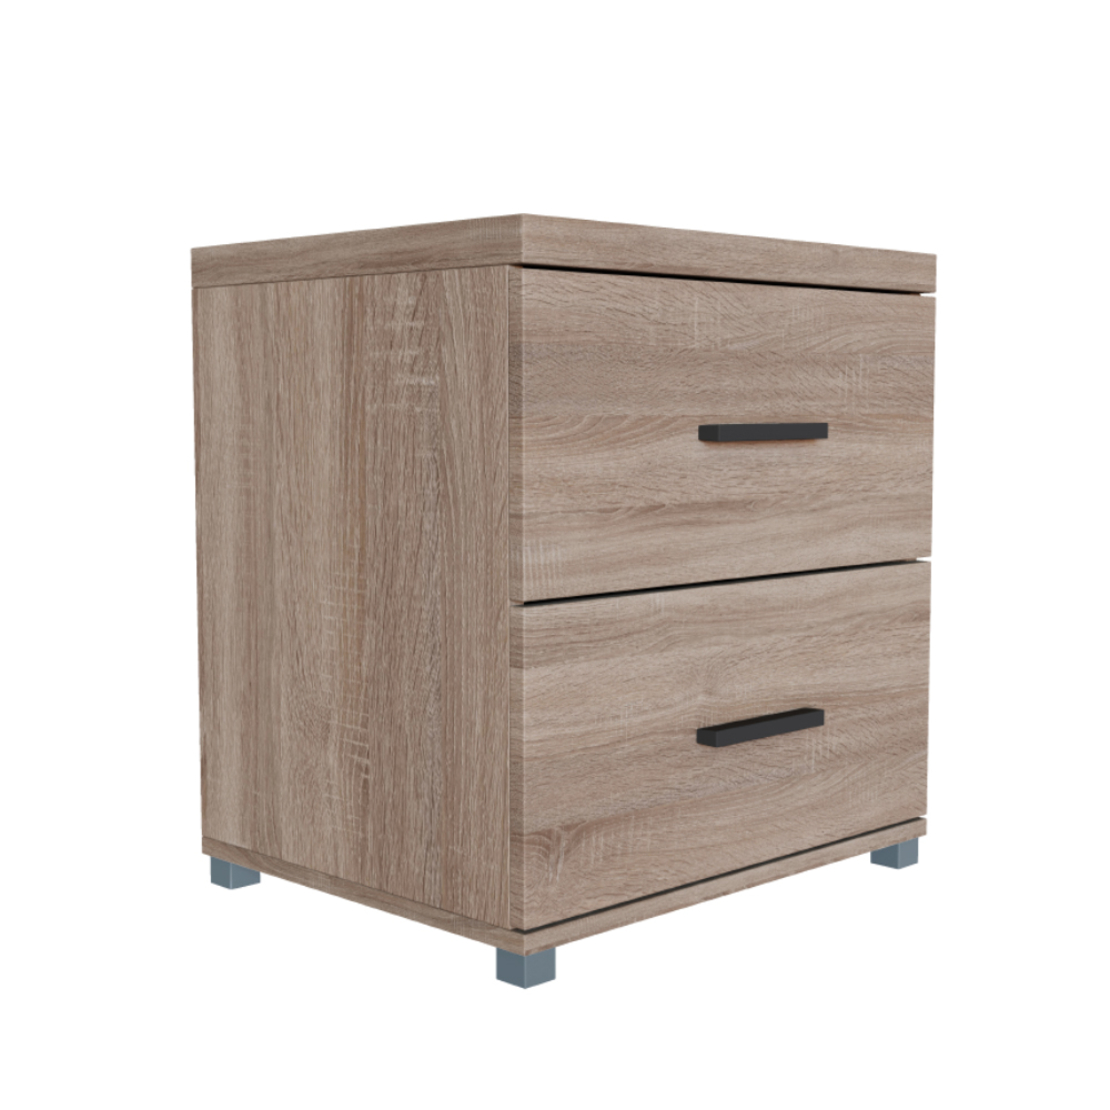 MILKY NIGHTSTAND HONEYCOMB SONOMA CHIPBOARD WITH MELAMINE E1 PRC